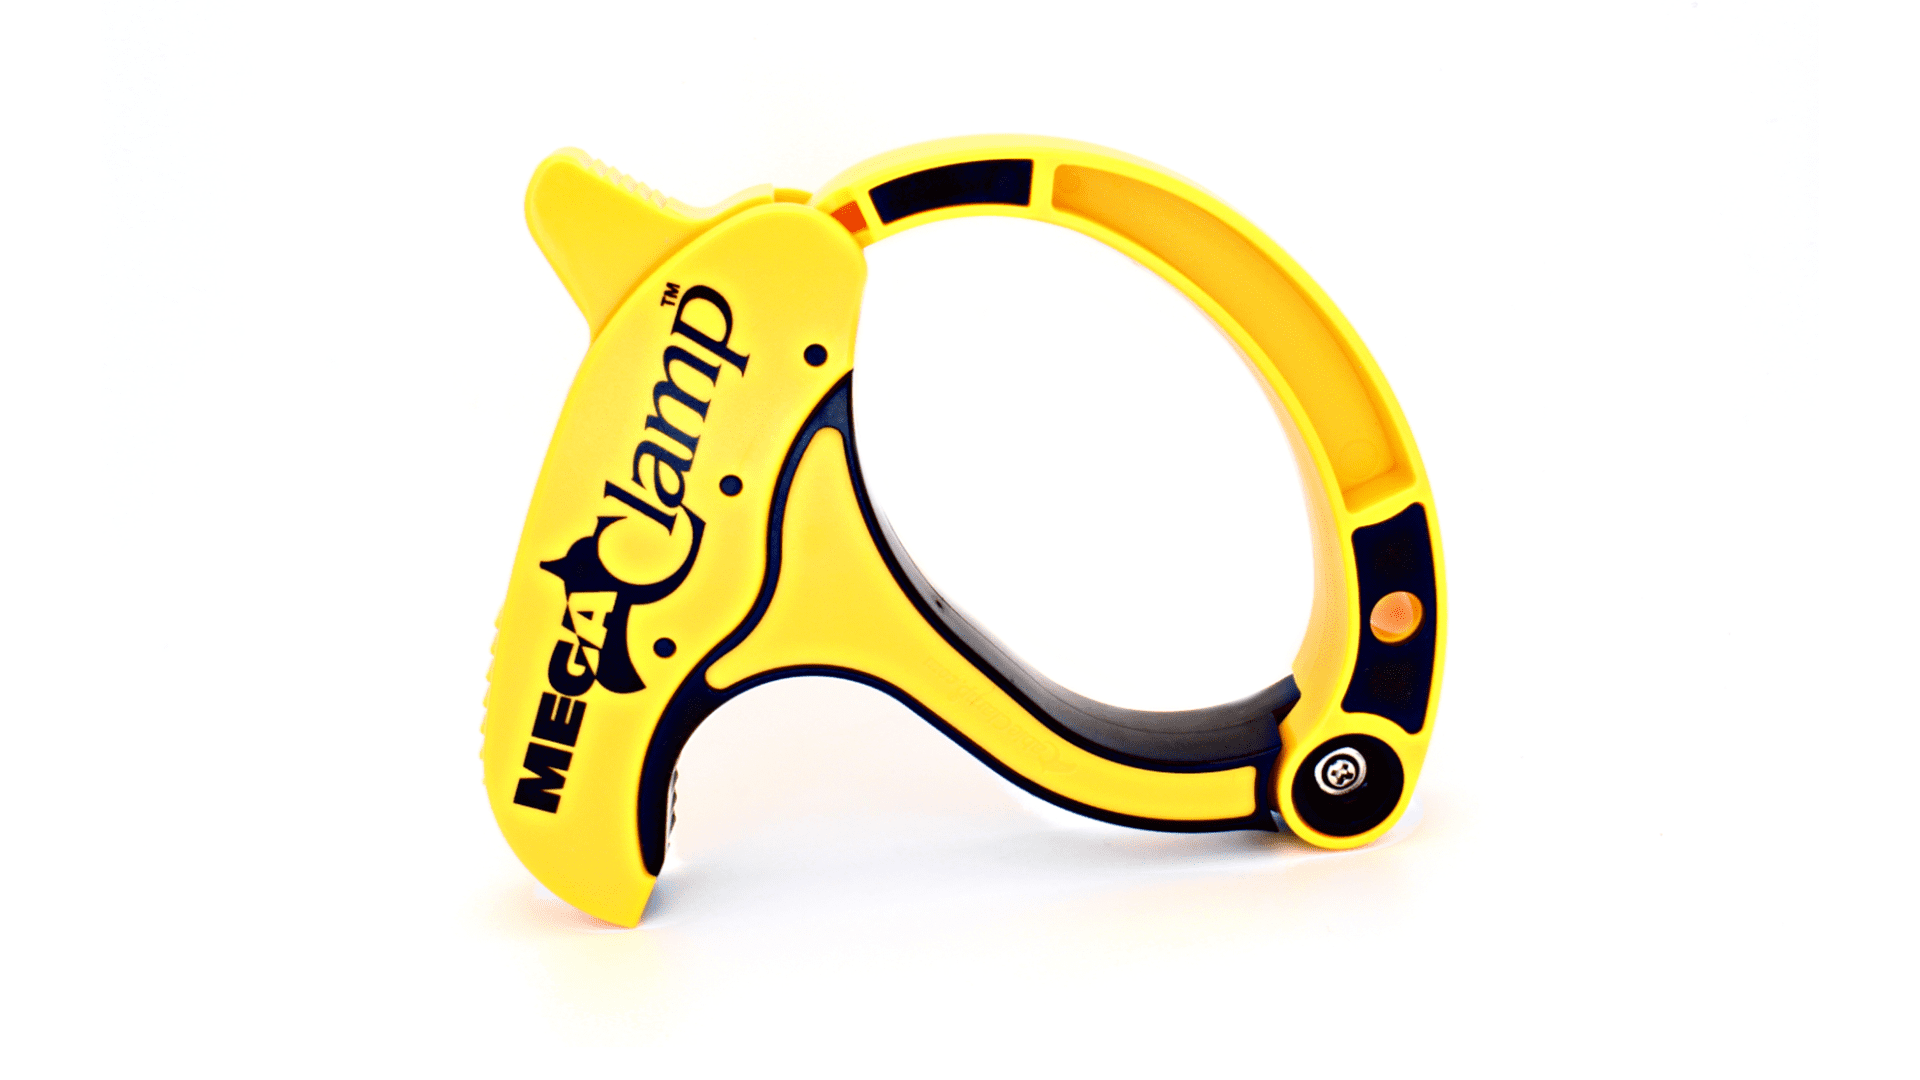 Mega Clamp for Cable & Hose Management (Yellow/Black) $1.50 + Free S&H w/ Walmart+ or $35+